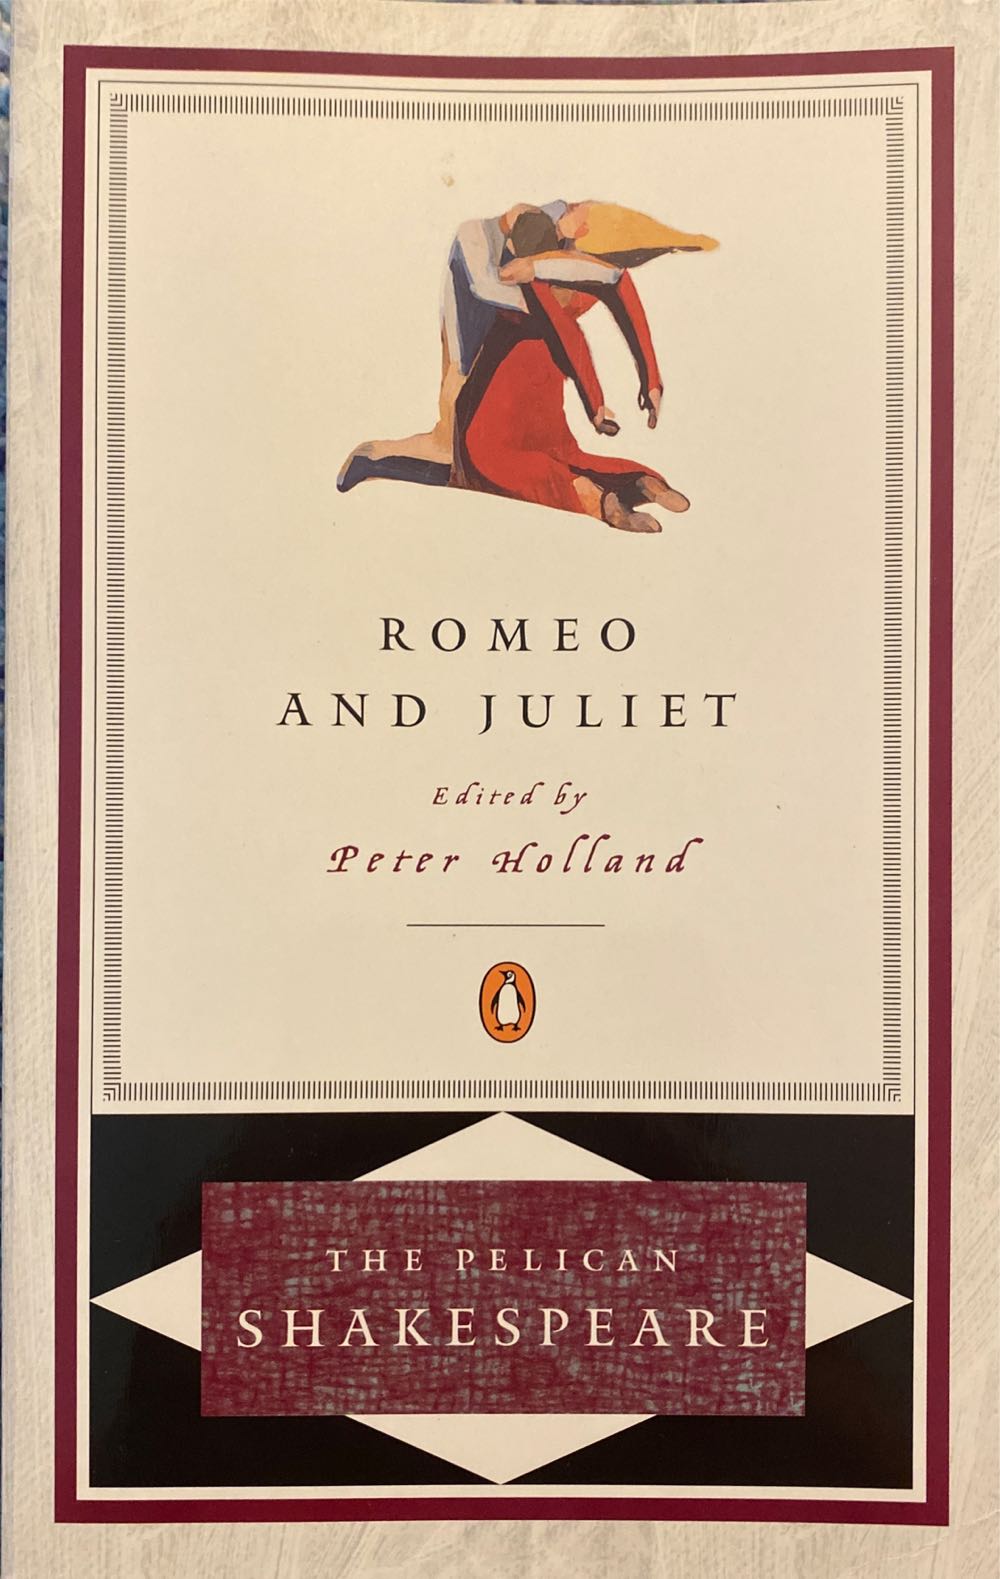 Romeo and Juliet - William Shakespeare (Penguin Classics - Paperback) book collectible [Barcode 9780140714845] - Main Image 3